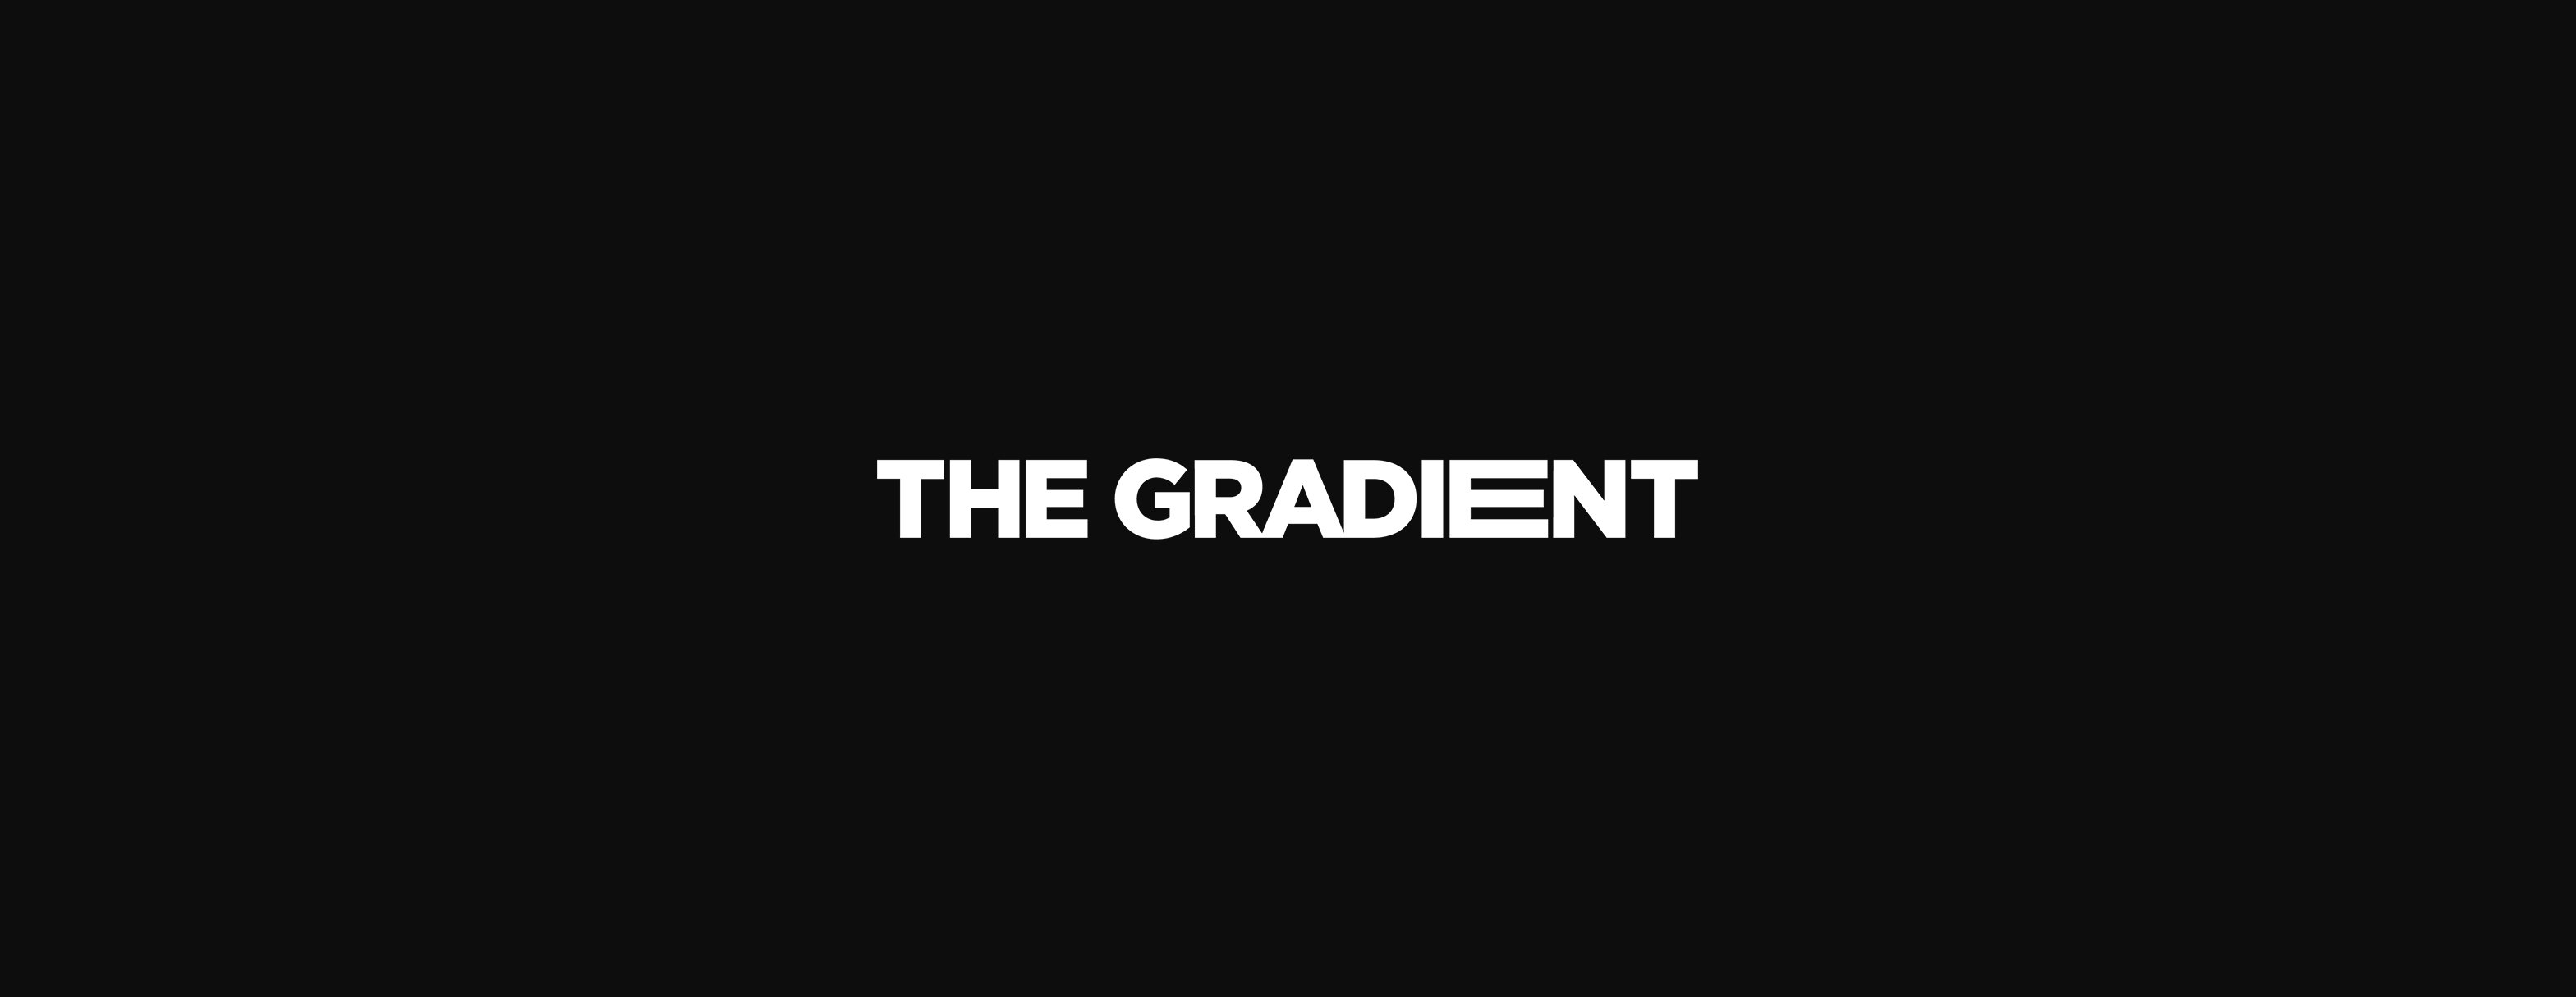 The Gradient cover